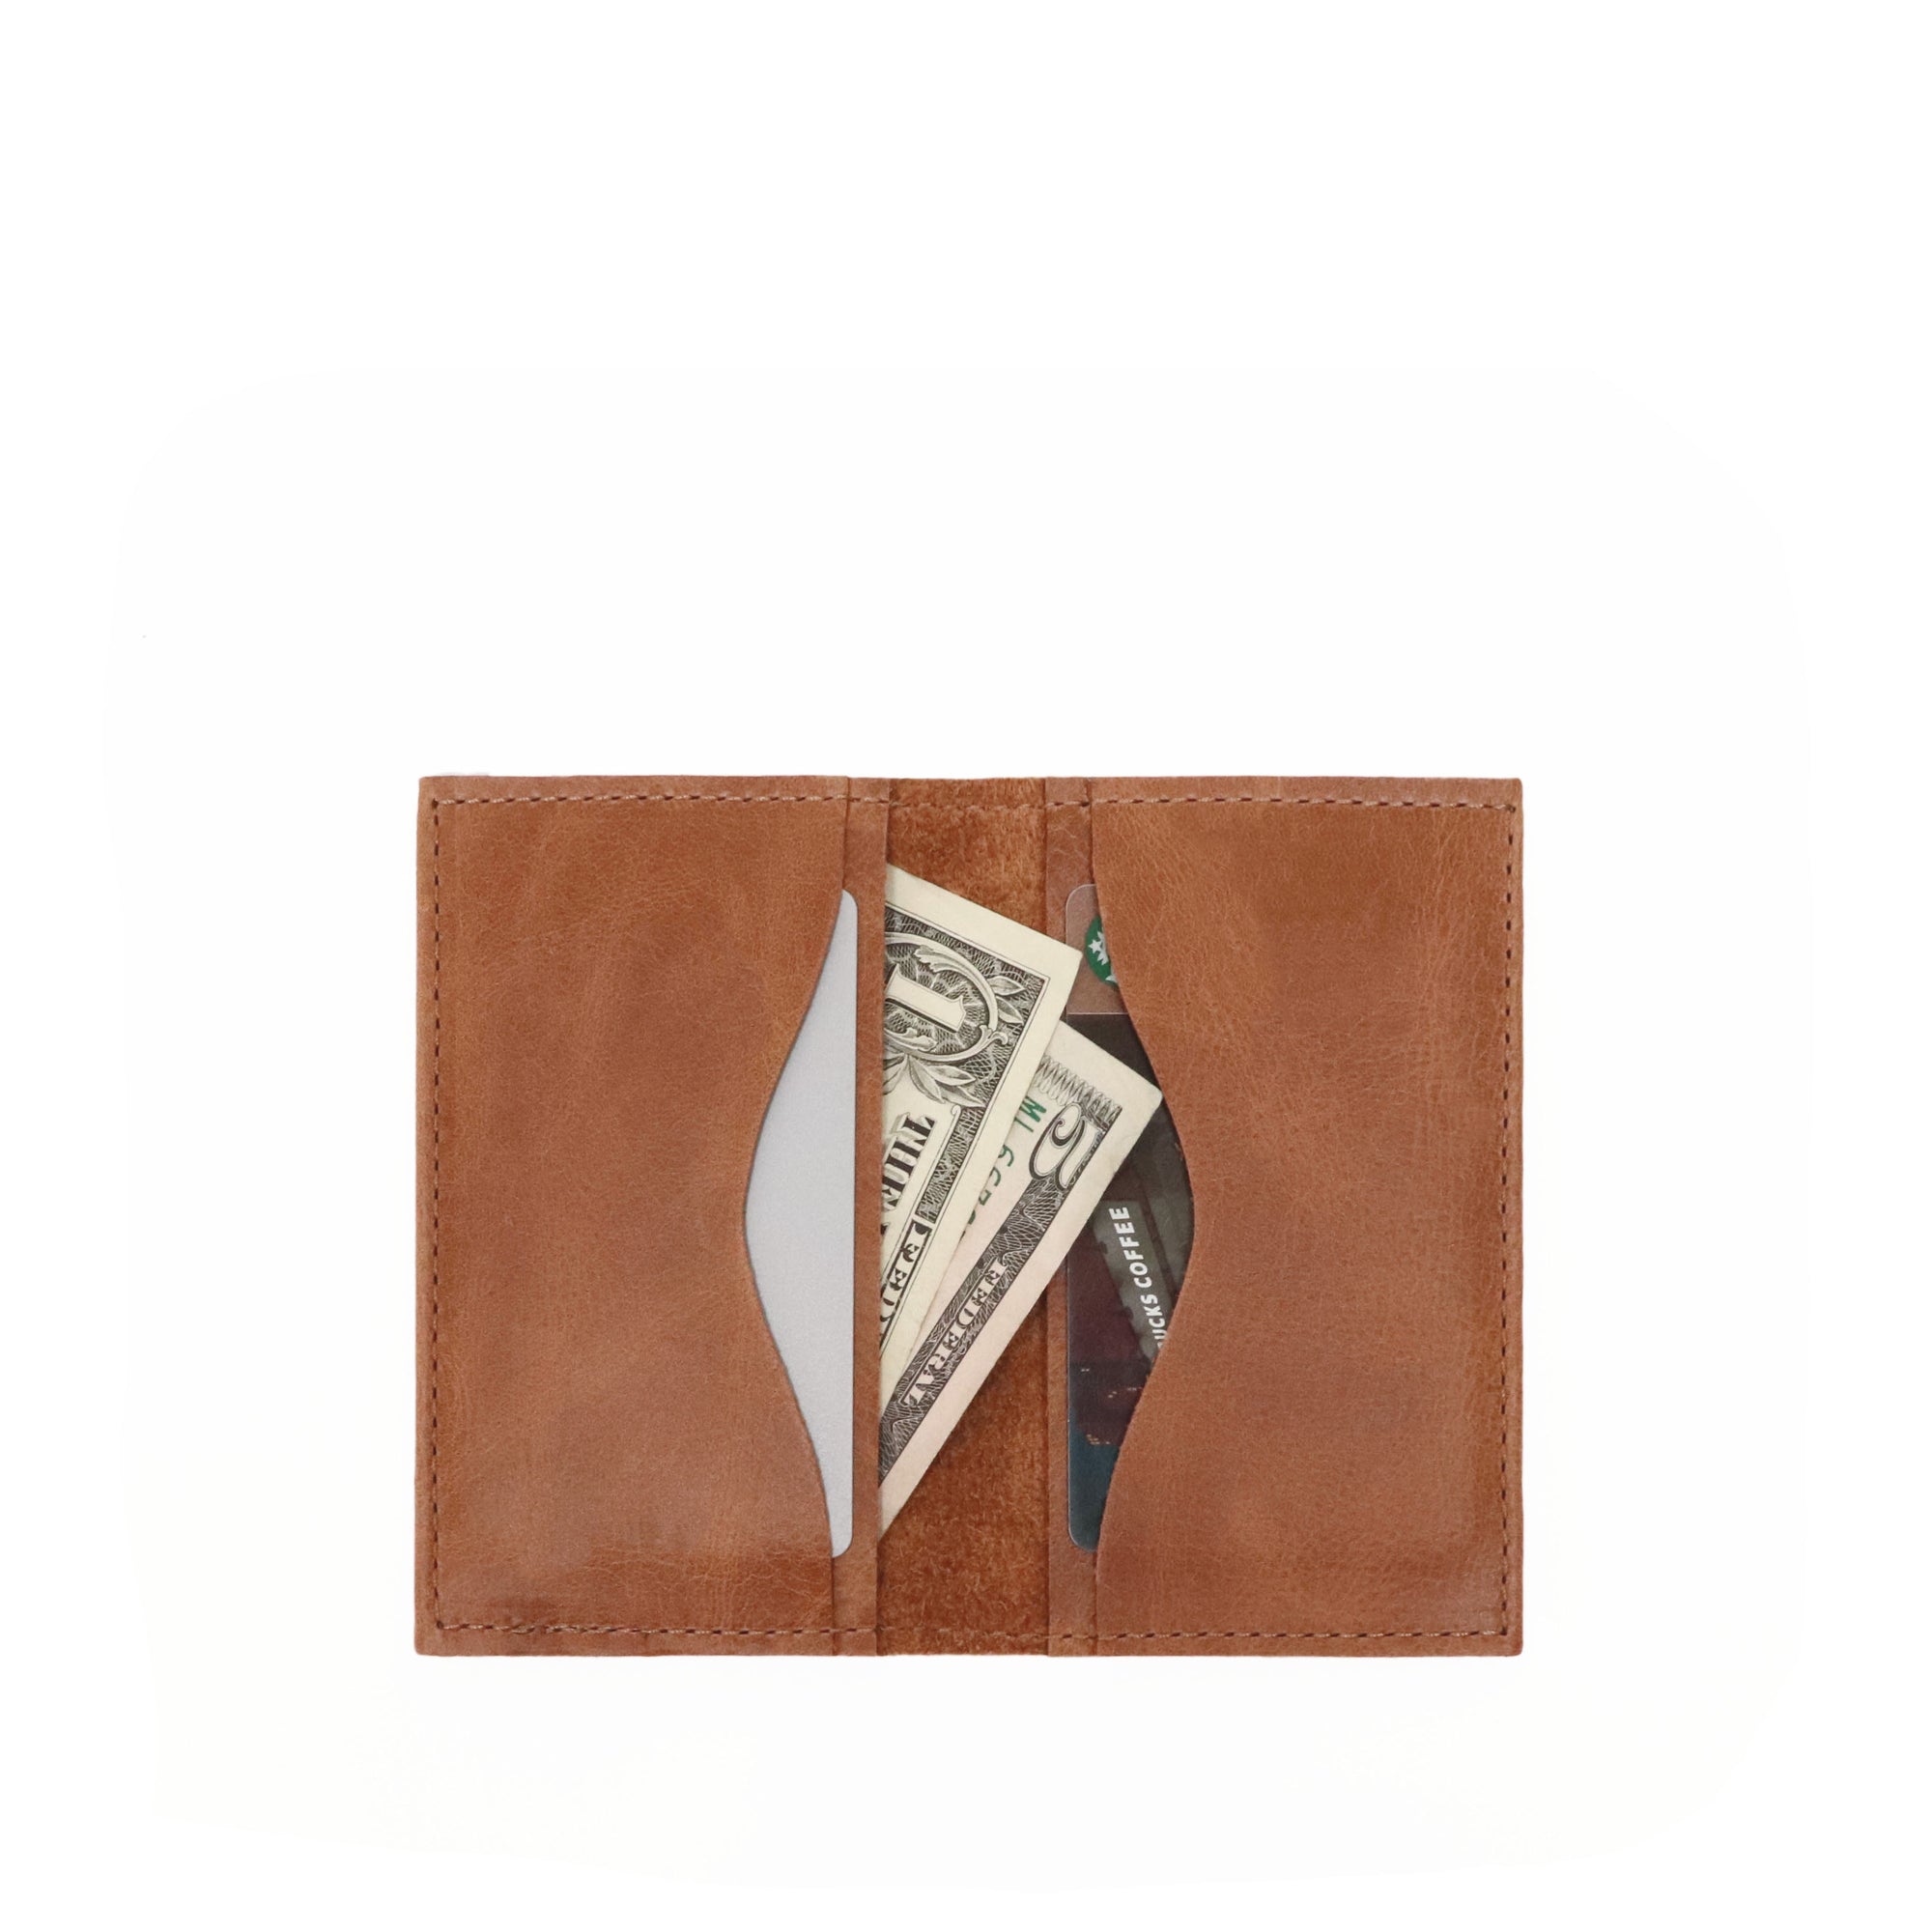 Cypress fold wallet in white leather.  Made in USA by jana kay 